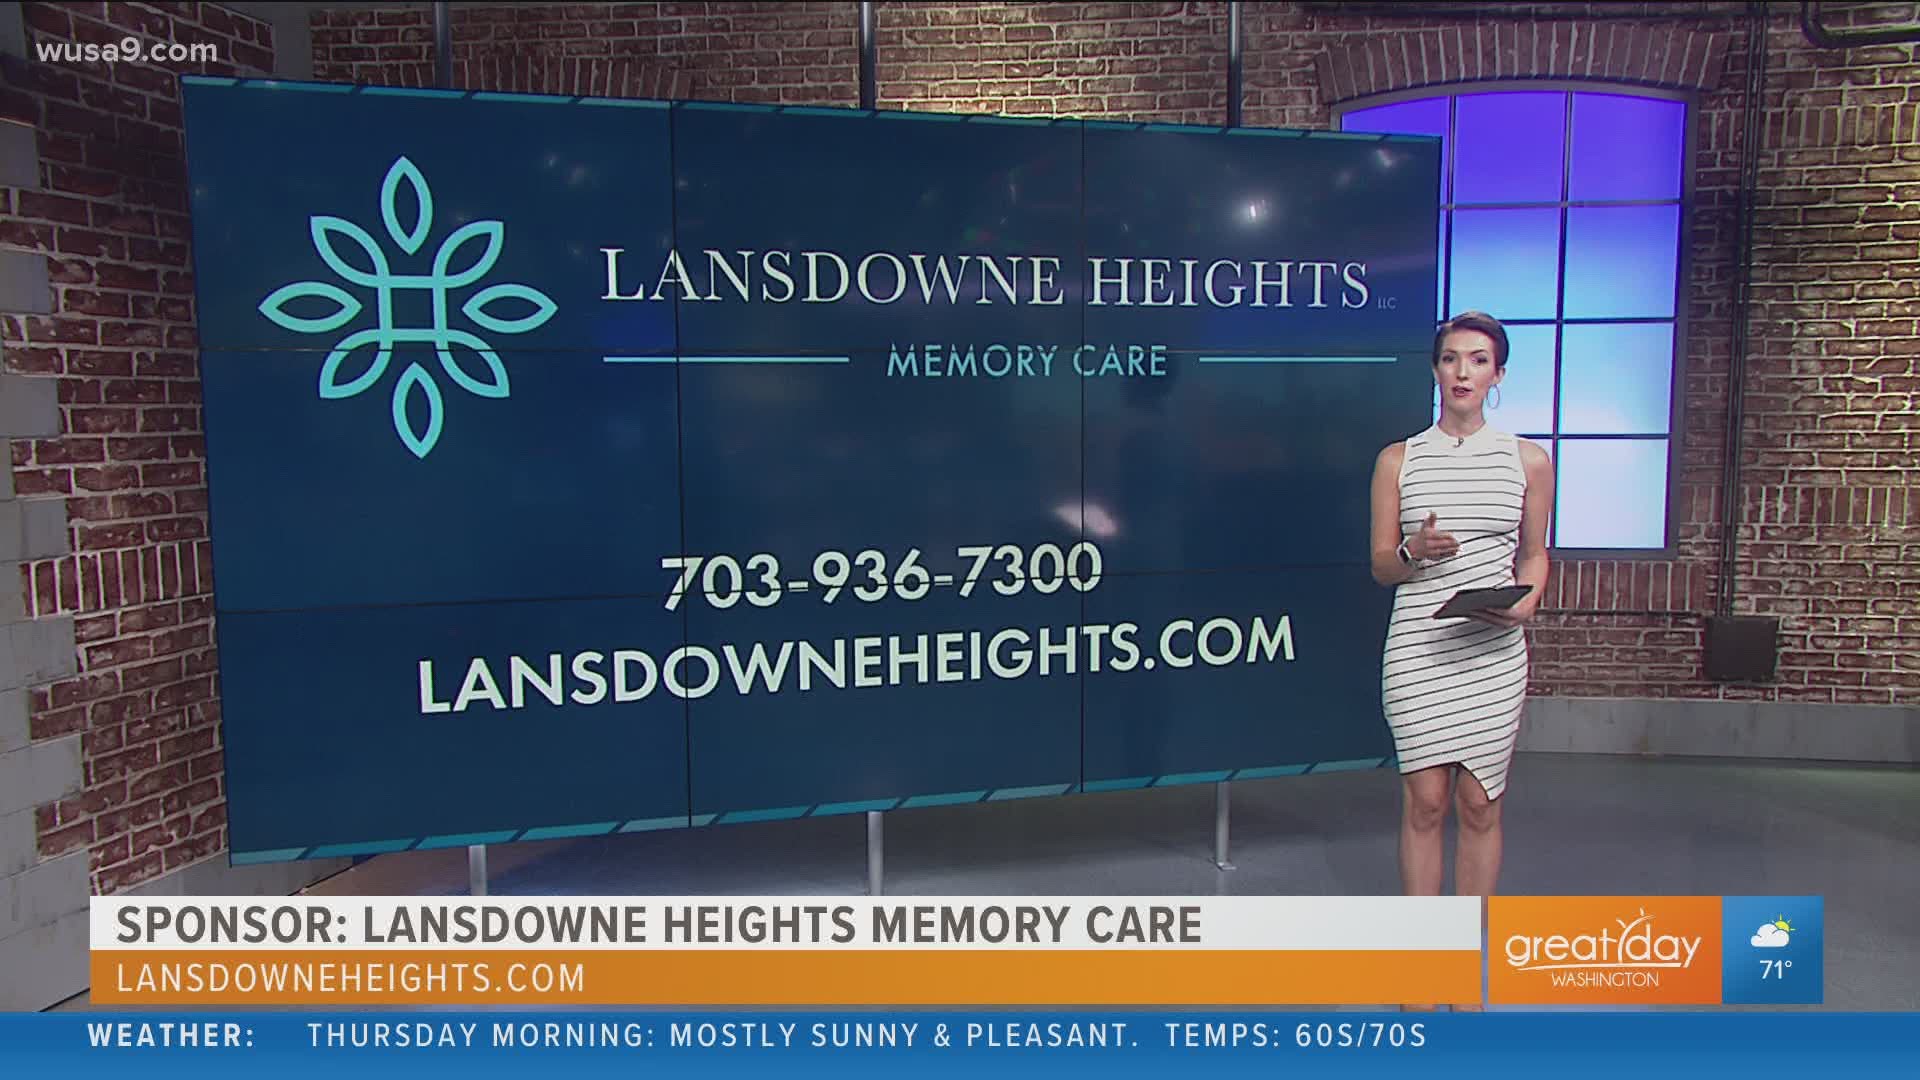 Sponsored by Lansdowne Heights Memory Care. Visit LansdowneHeights.com or call 703-936-7300 for more information.